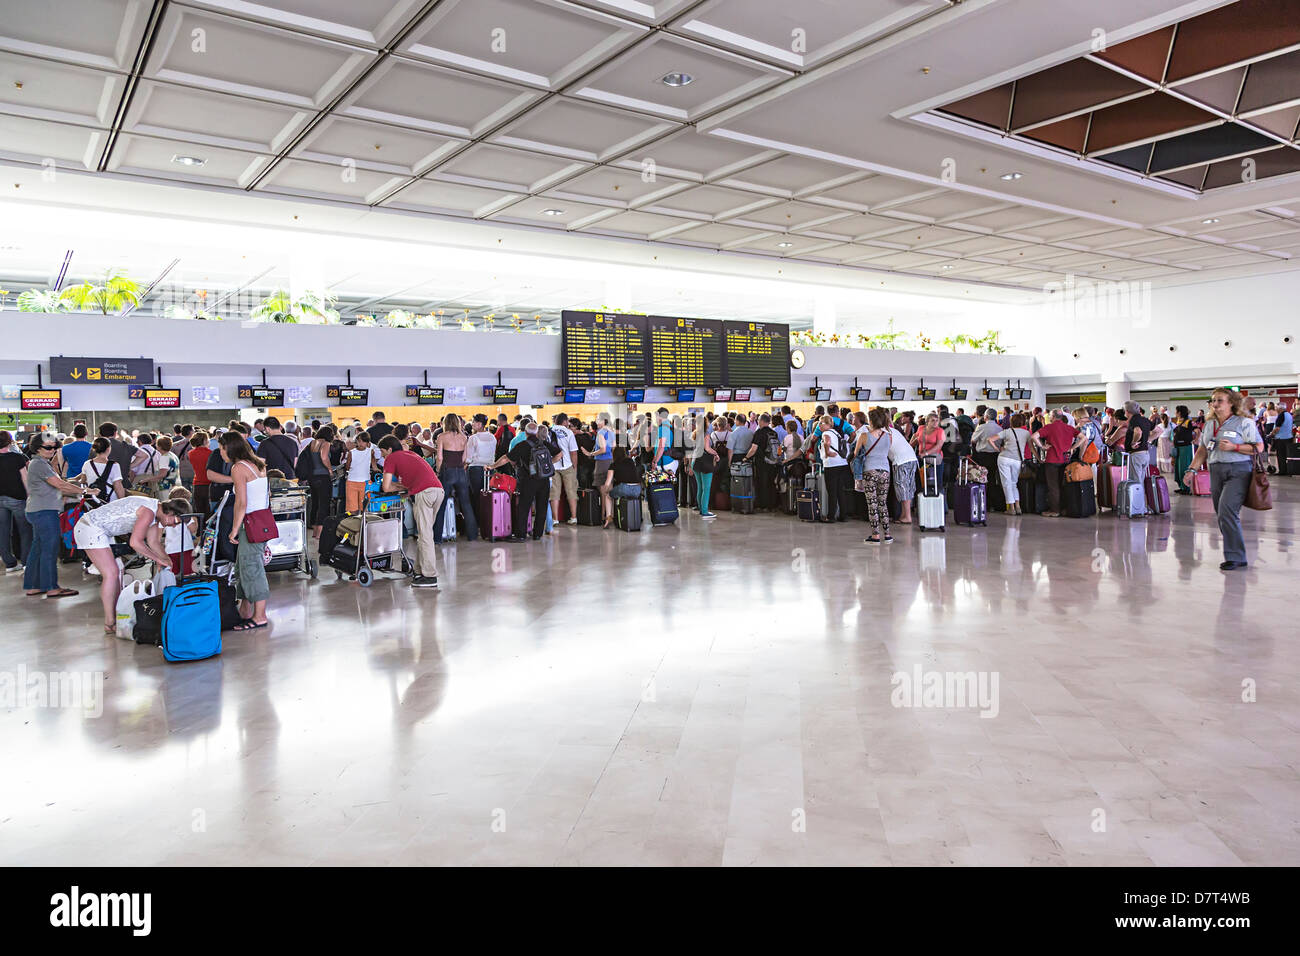 People waiting in line to check in at airport, Lanzarote, Canary Islands, Spain Stock Photo